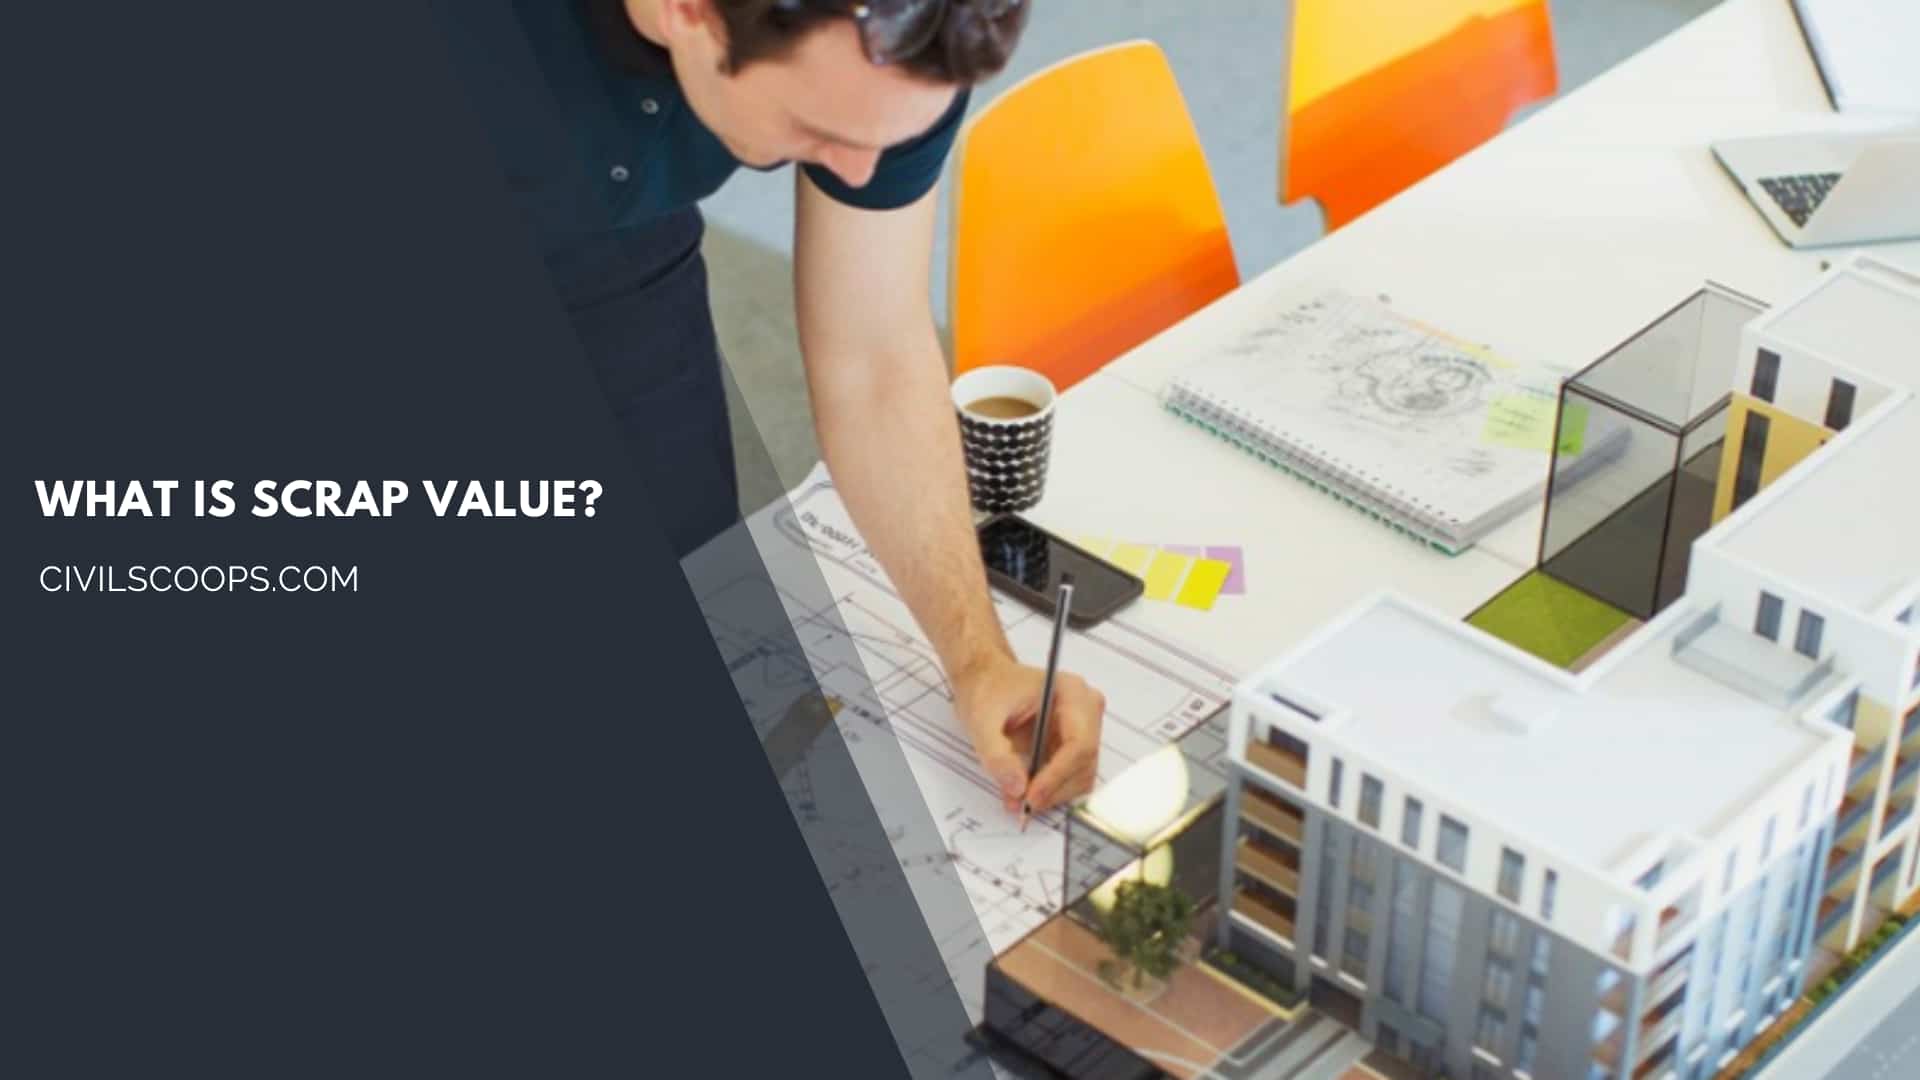 What Is Scrap Value?